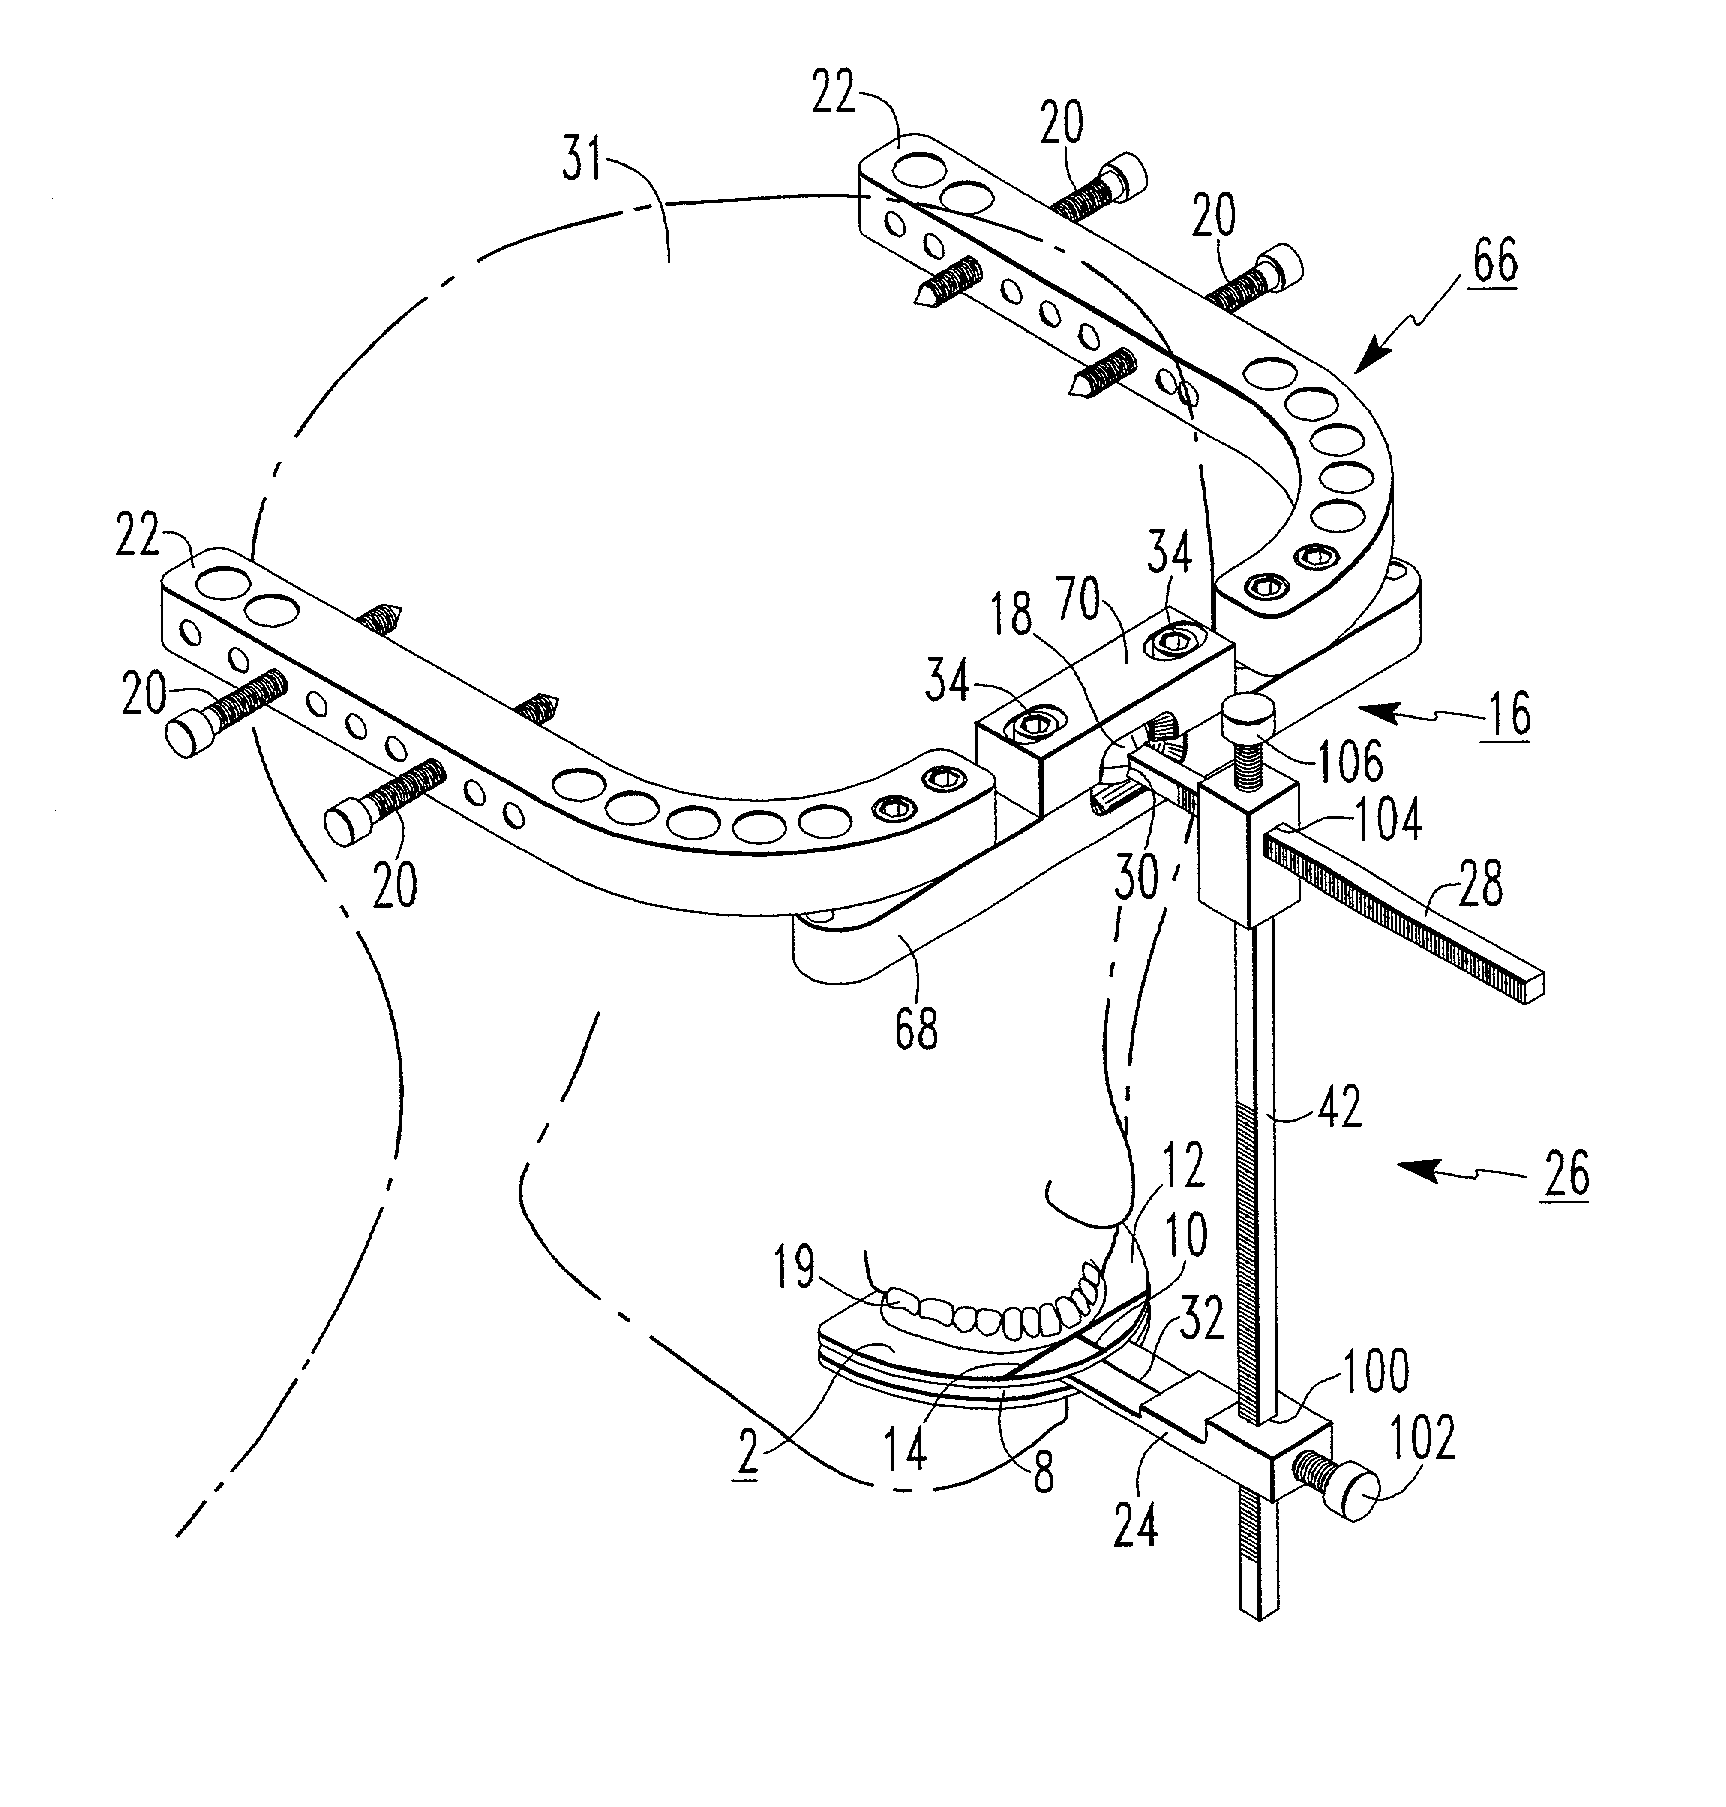 Method and apparatus to assist in orthognathic surgery